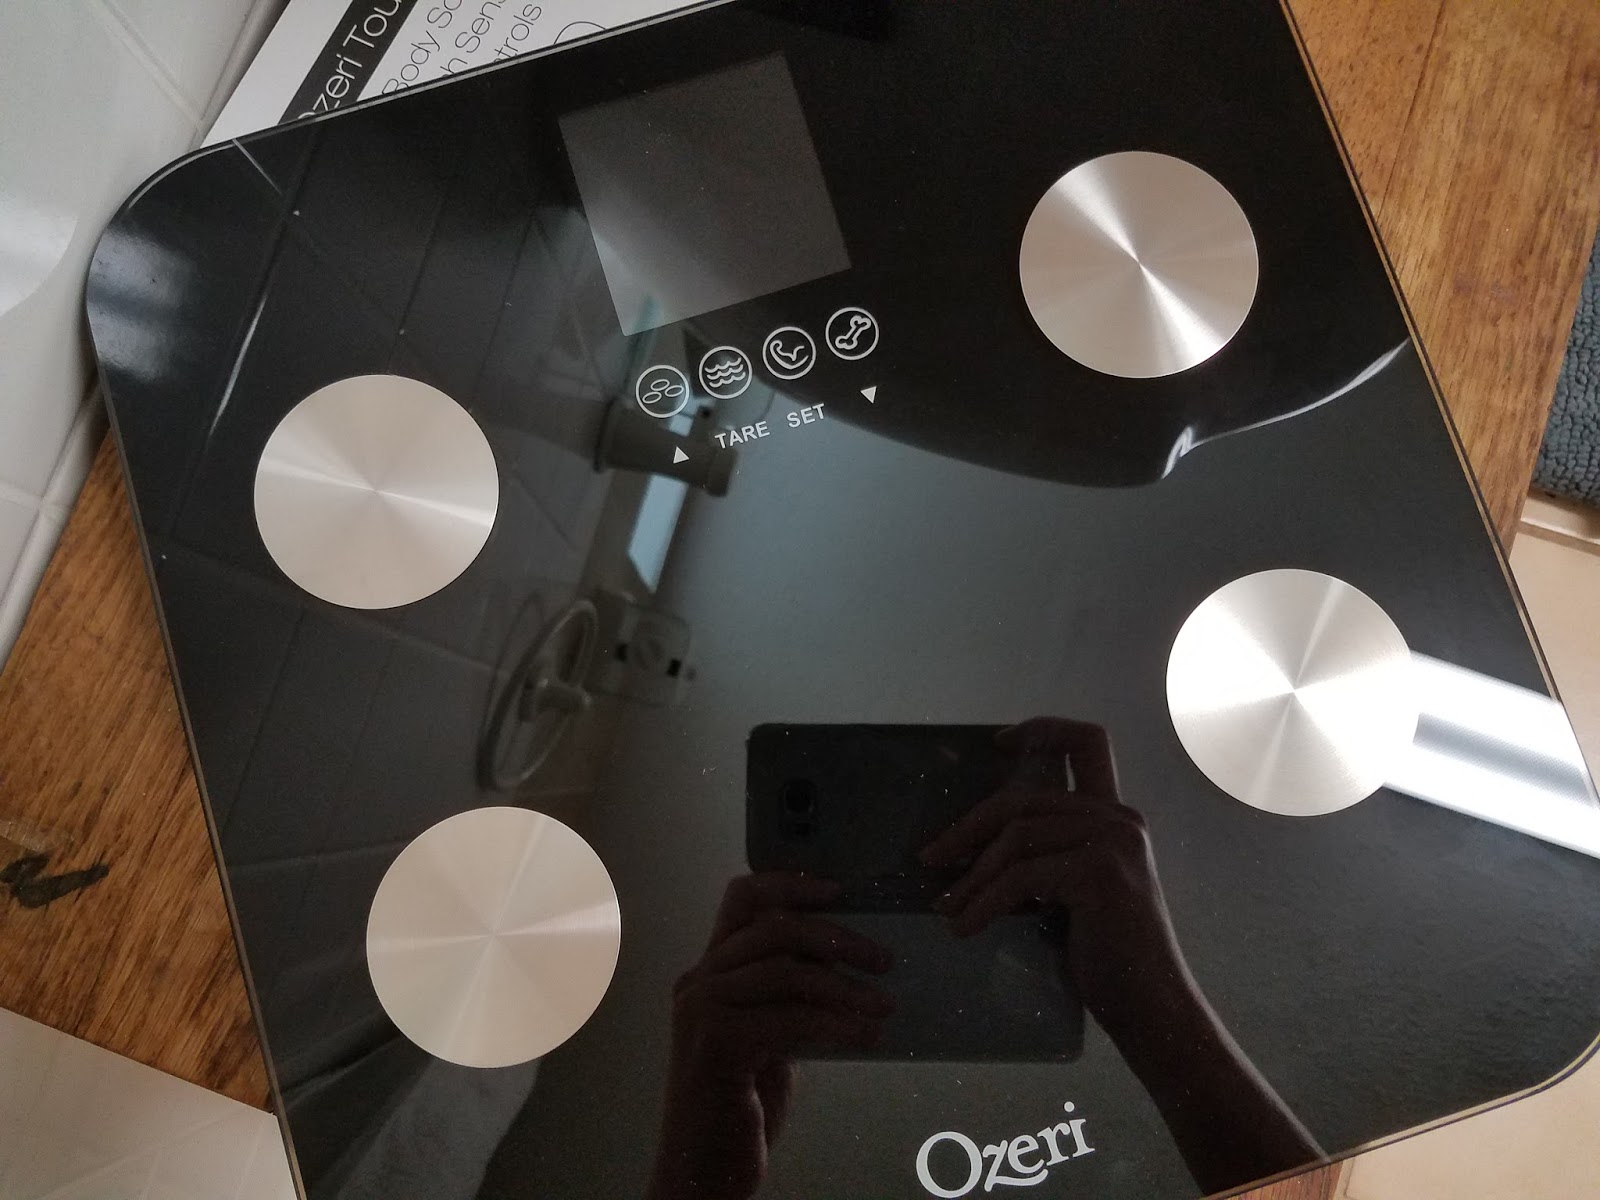  Ozeri All-in-One Baby and Toddler Scale with Weight